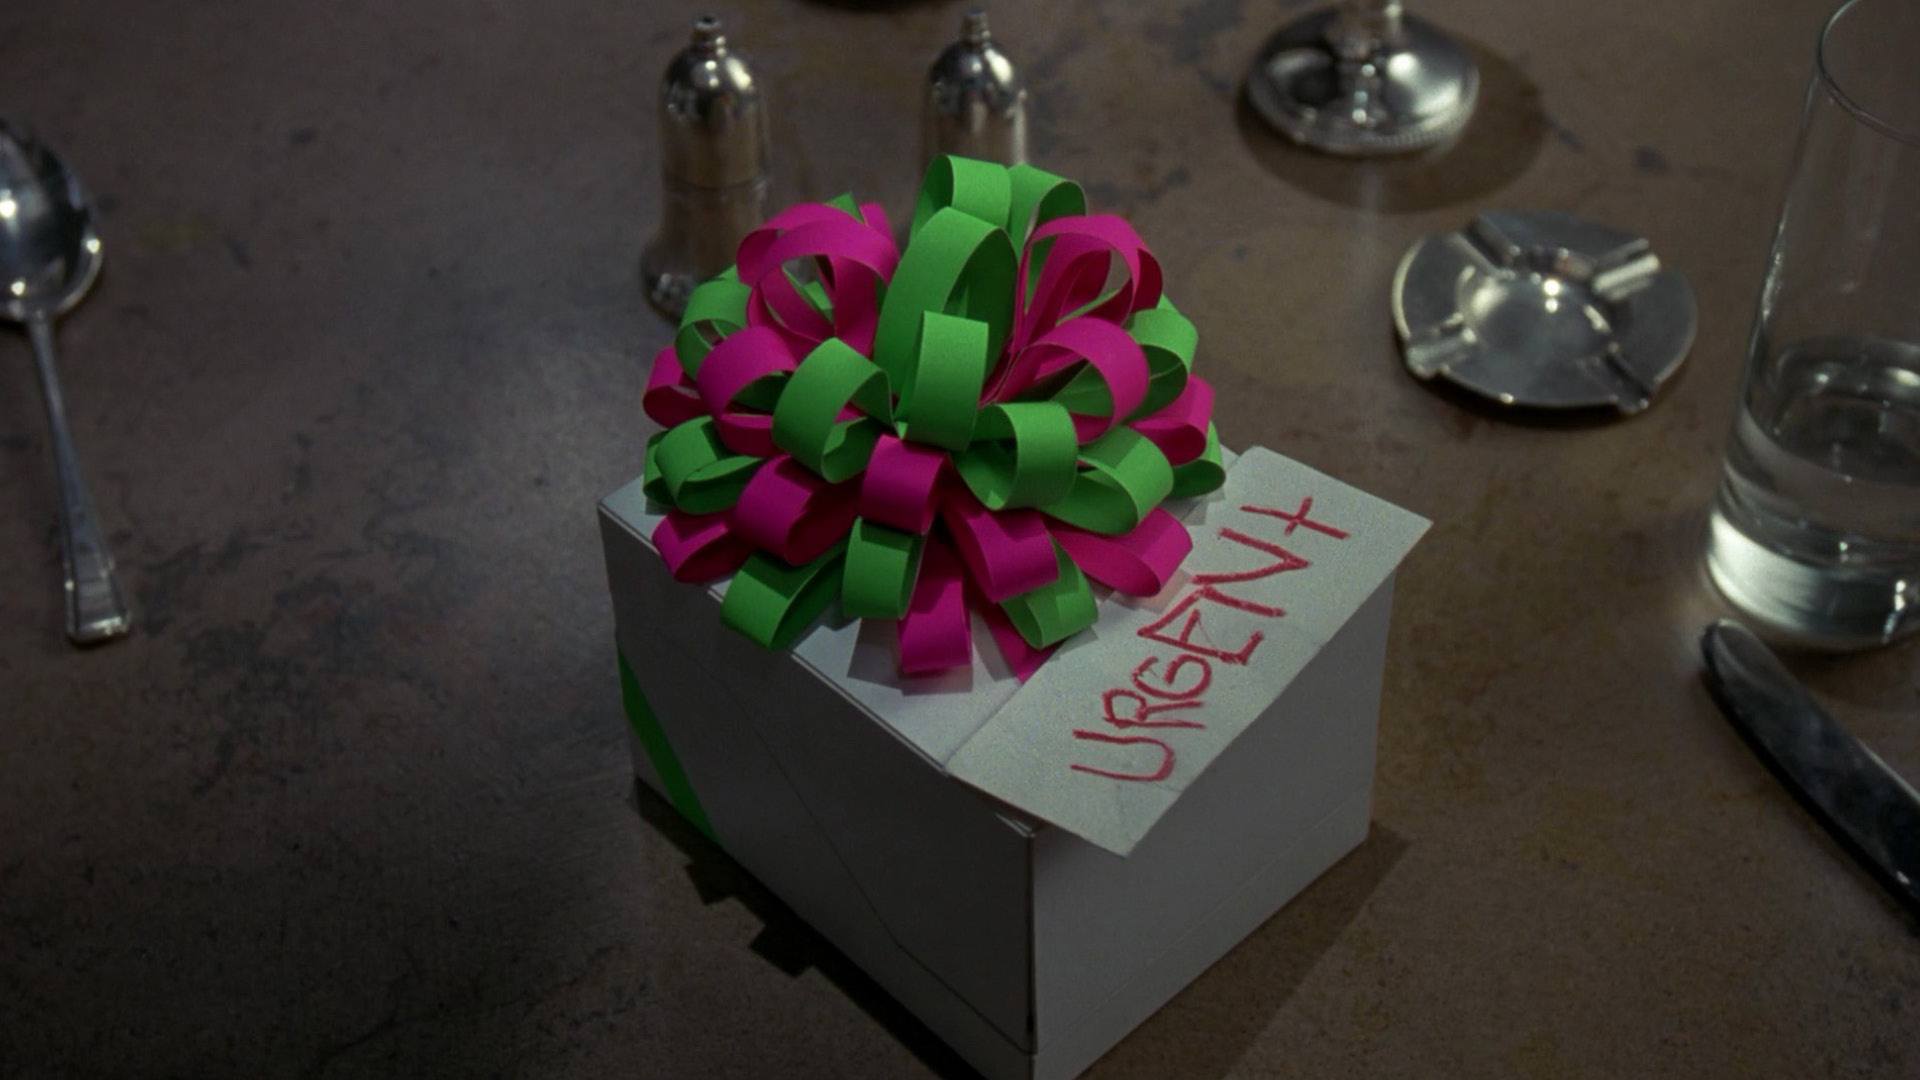 BATMAN film still of a white package with a pink and green bow and a note with the word "URGENT" written on it.